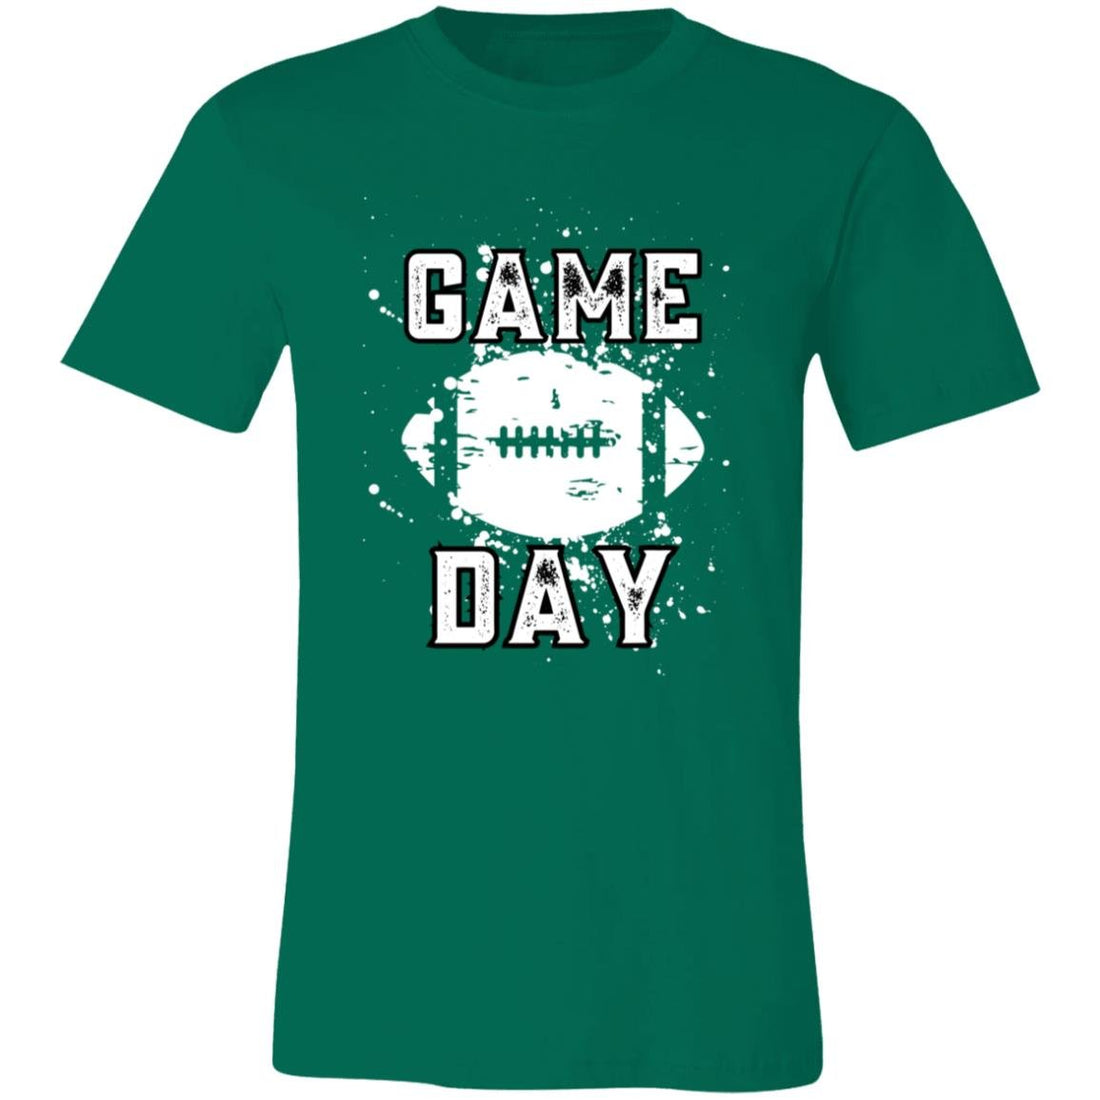 Game Day Distressed Football Short-Sleeve T-Shirt - T-Shirts - Positively Sassy - Game Day Distressed Football Short-Sleeve T-Shirt